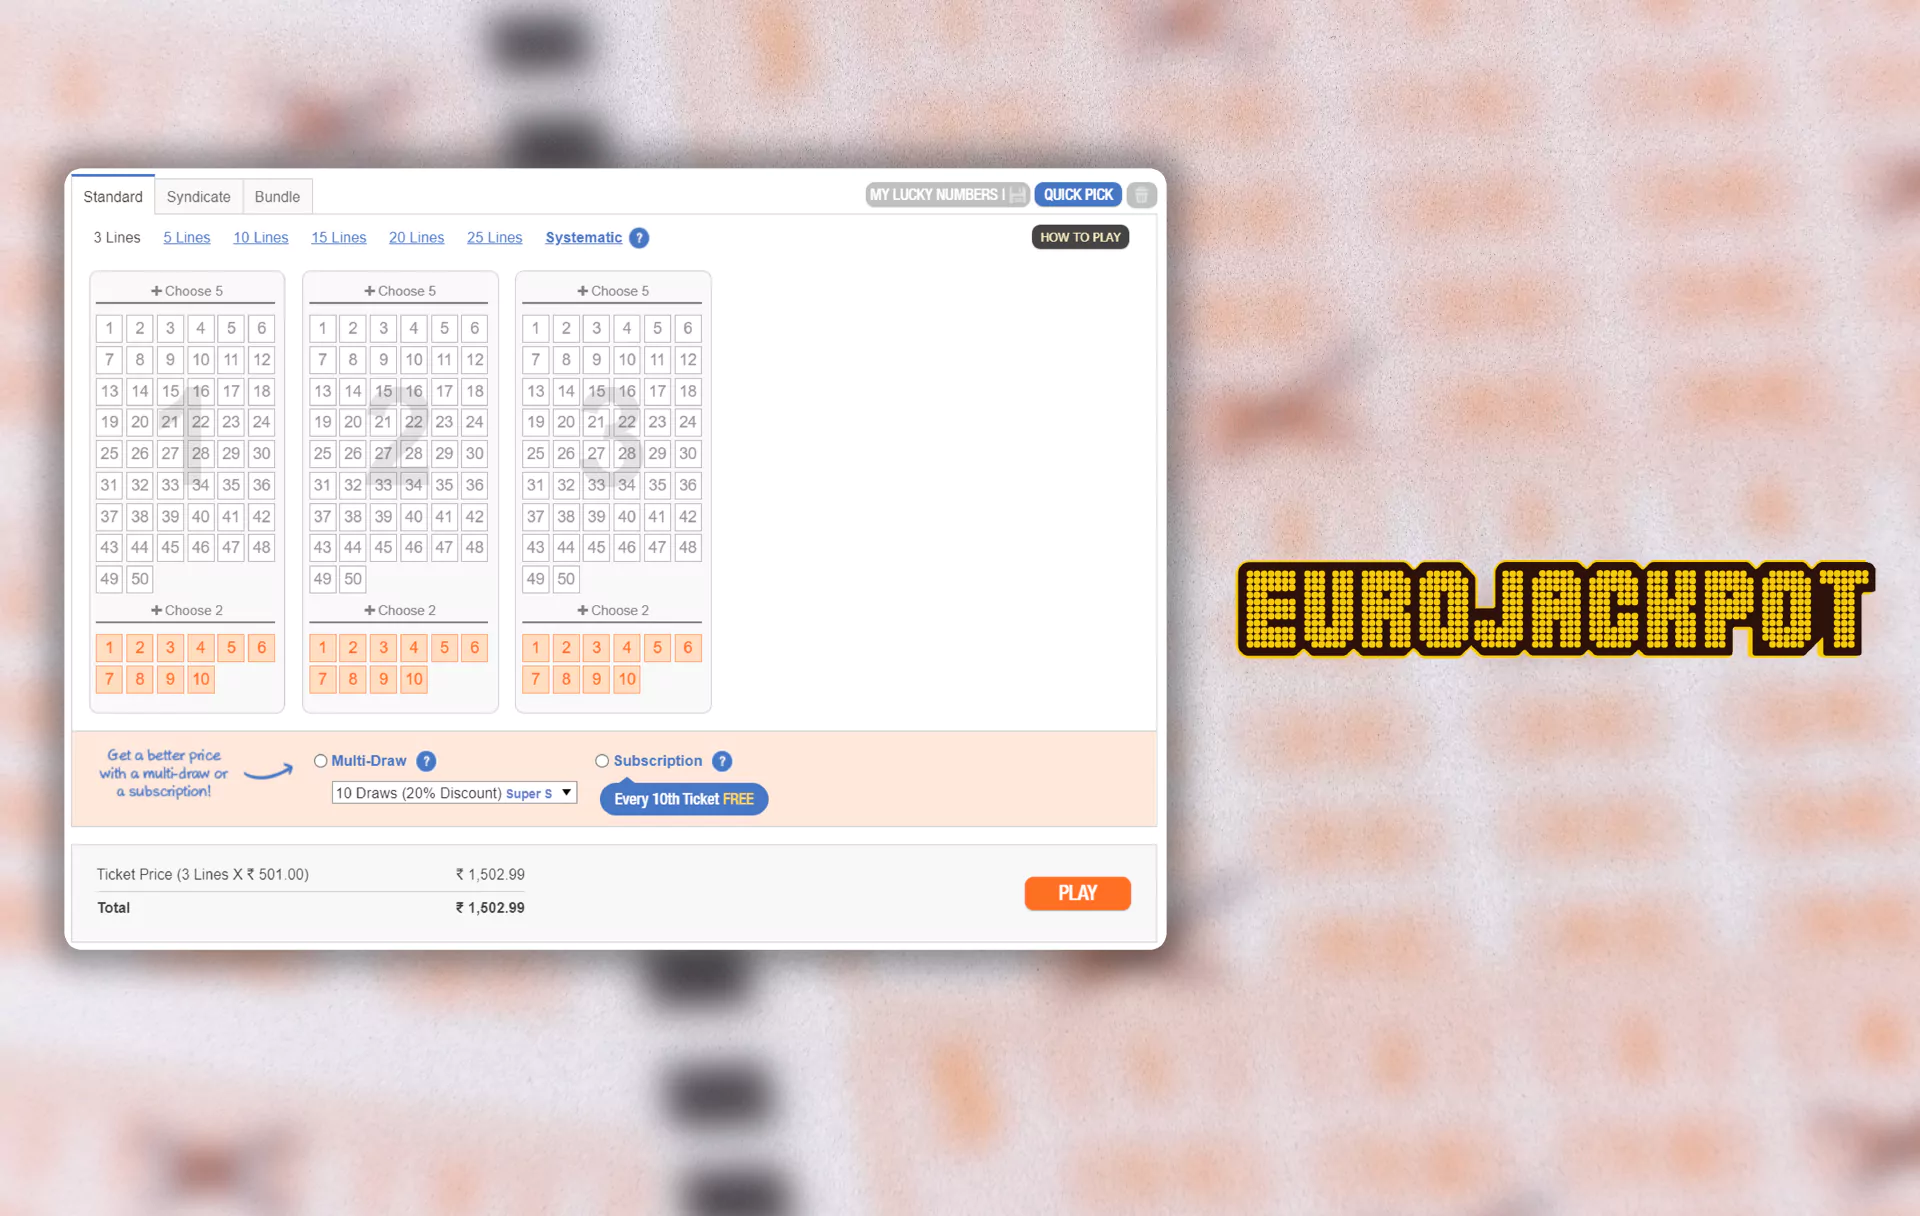 EuroJackpot is held in 9 countries of Europe but you can buy the ticket via TheLotter site from India as well.